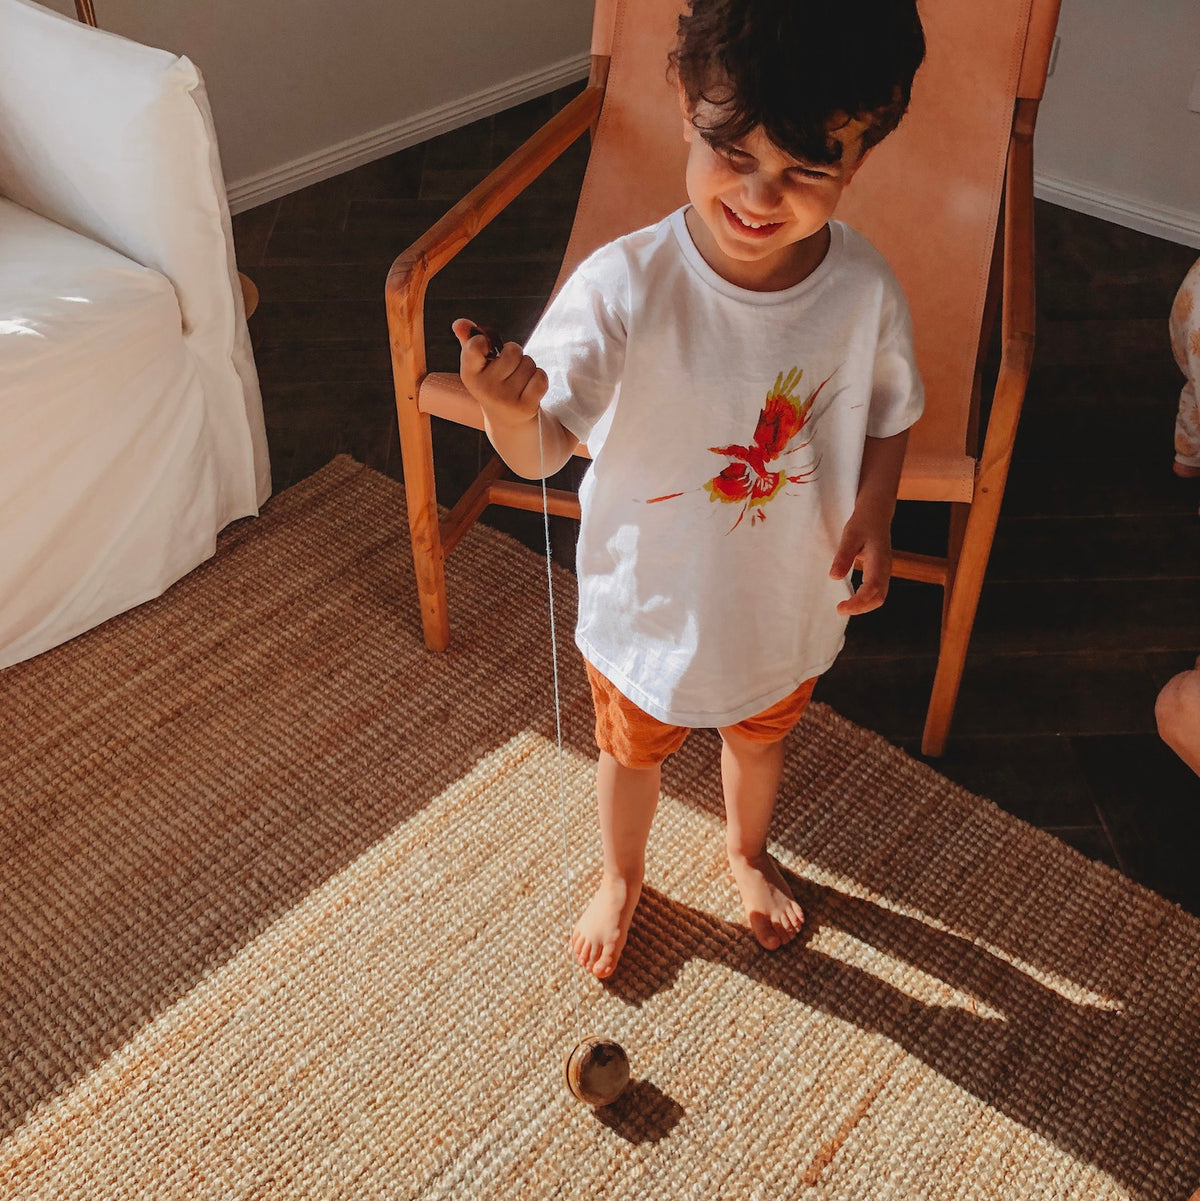 an image of a child with dark hair wearing a white printed tshirt and red shorts standing in front of a  tan coloured chair playing with a wooden yo yo